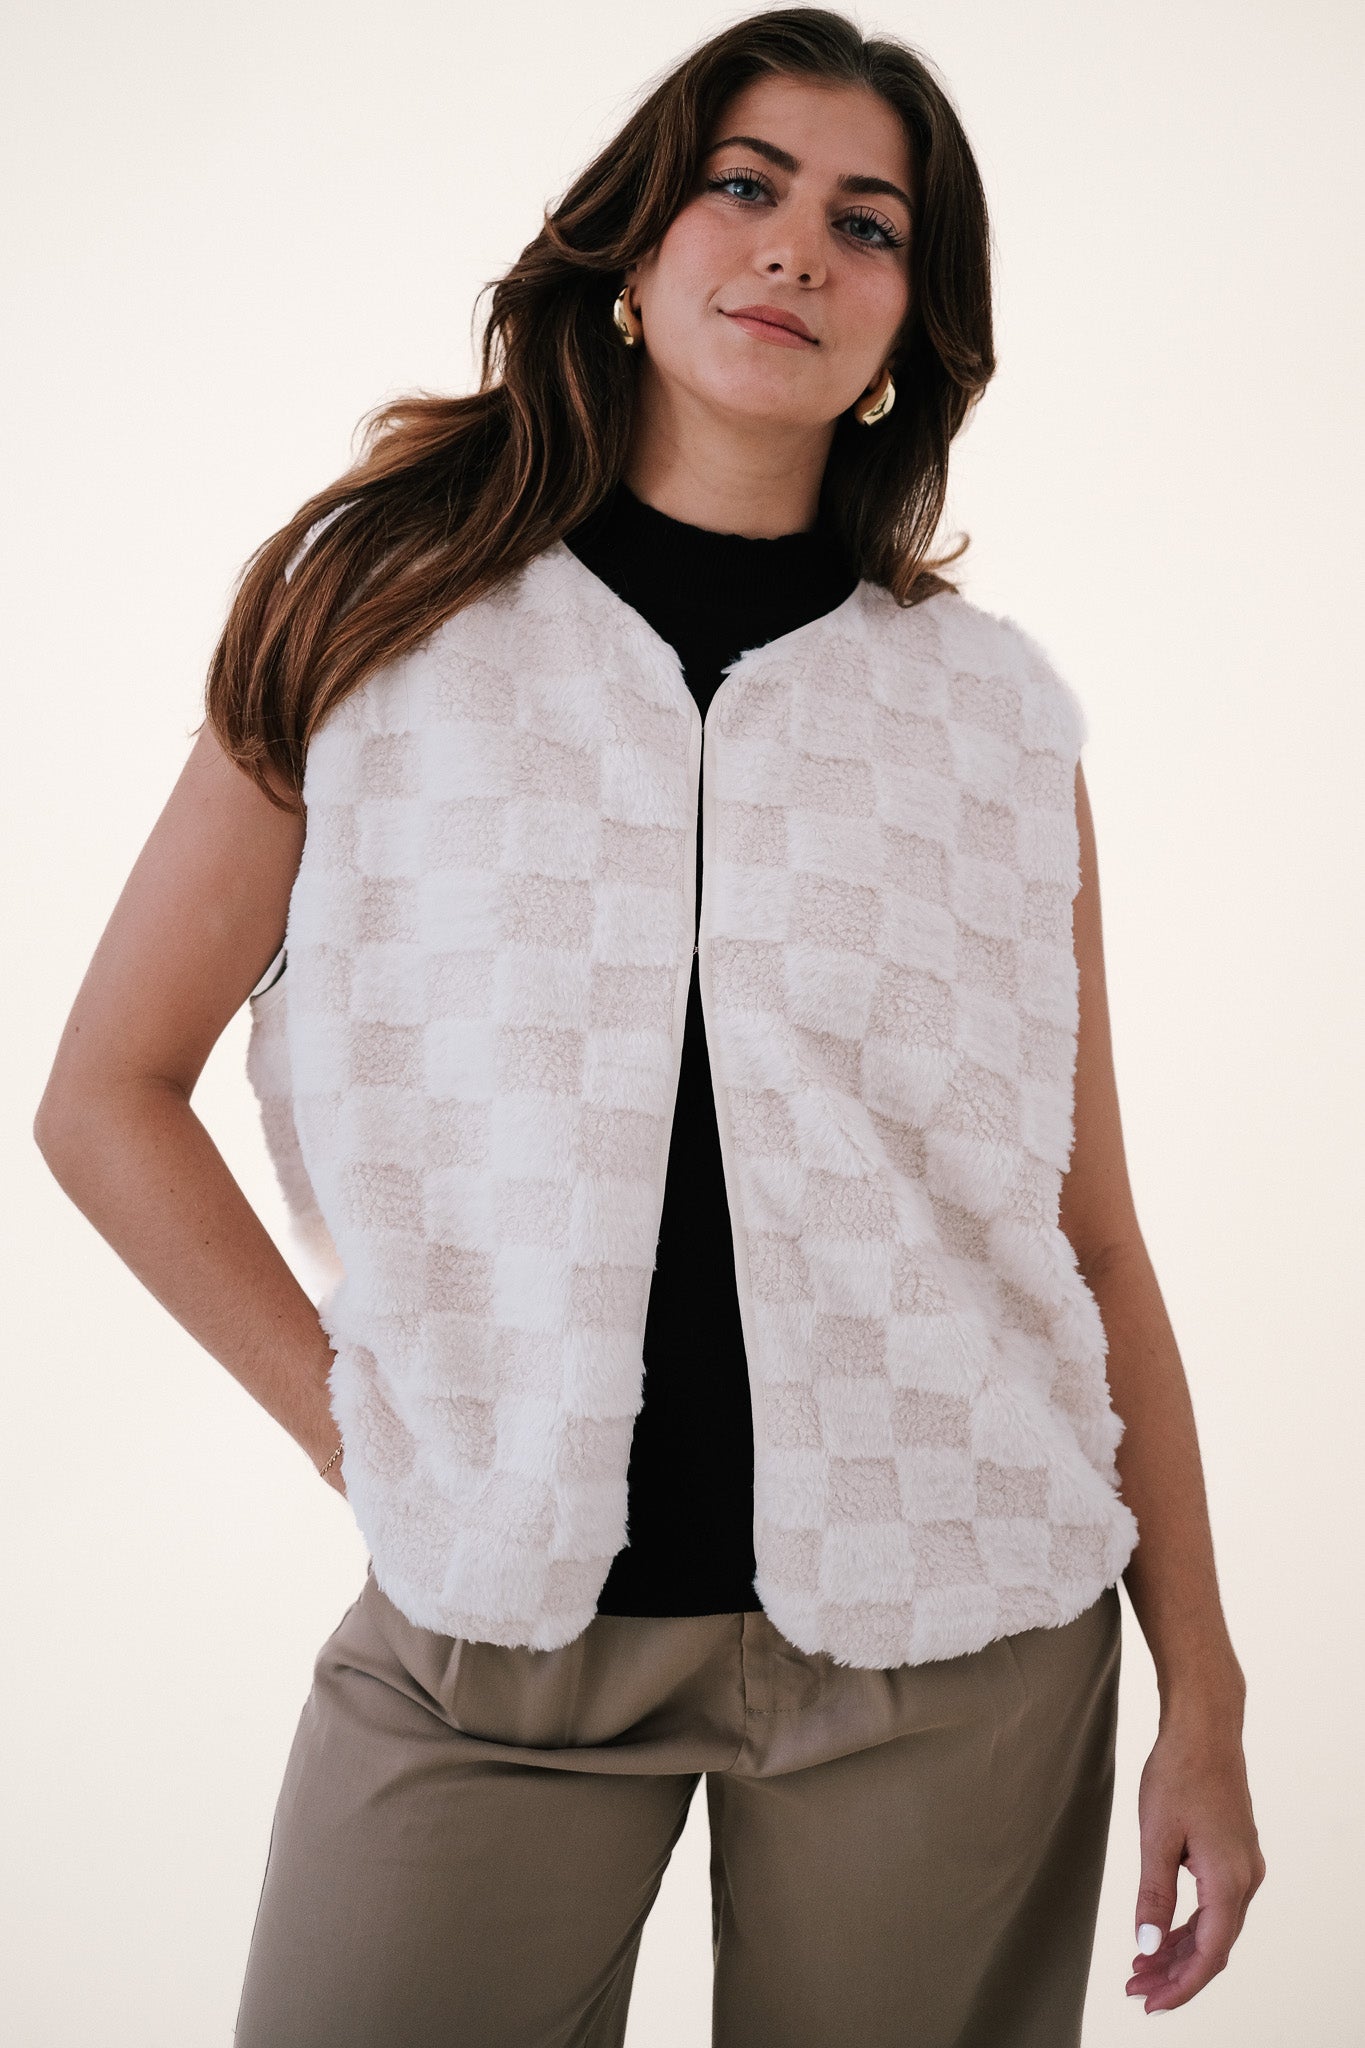 Things Between Lyla Ivory Fuzzy Checkered Vest